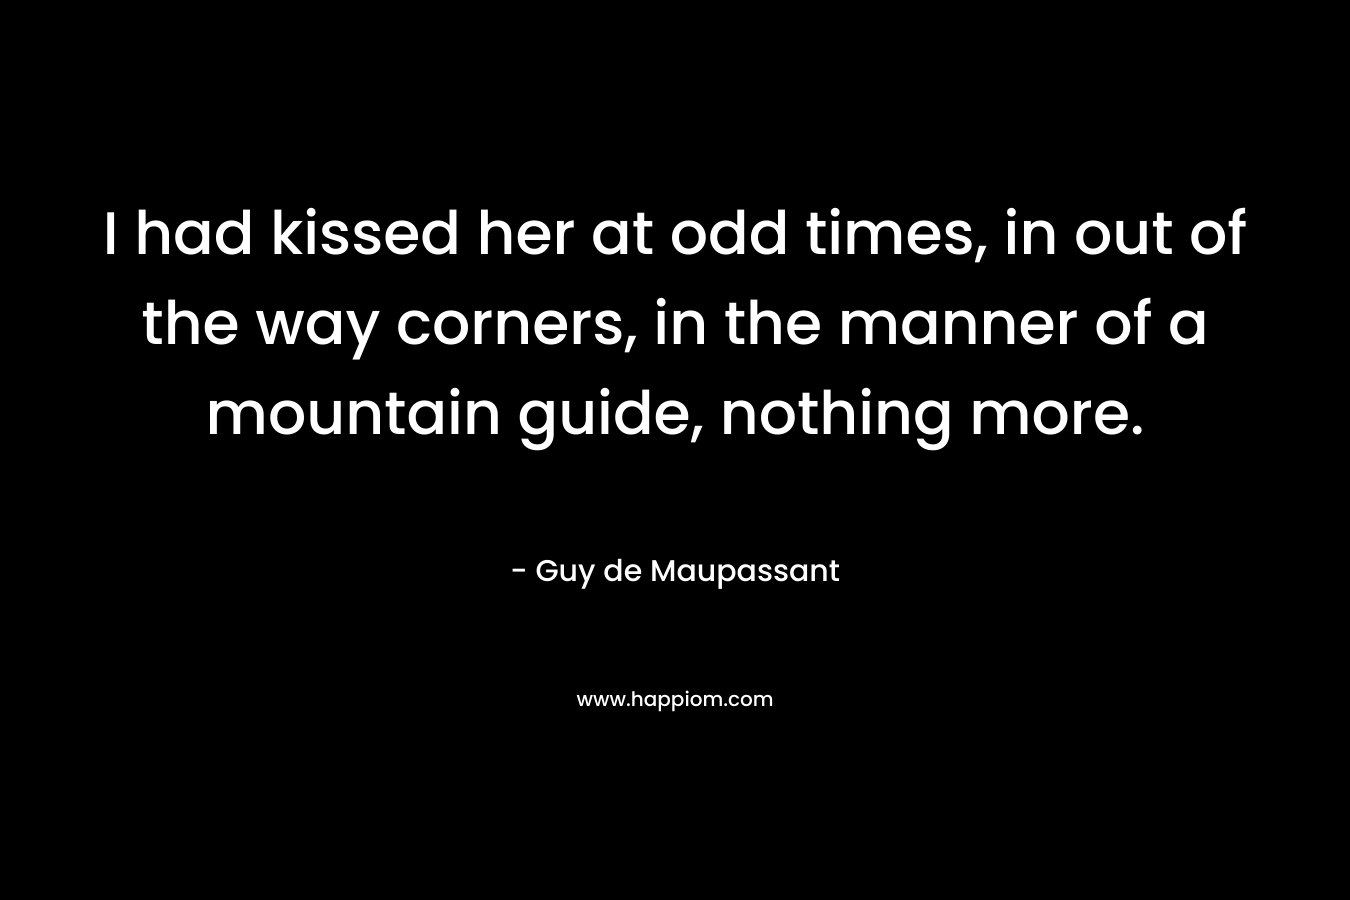 I had kissed her at odd times, in out of the way corners, in the manner of a mountain guide, nothing more. – Guy de Maupassant